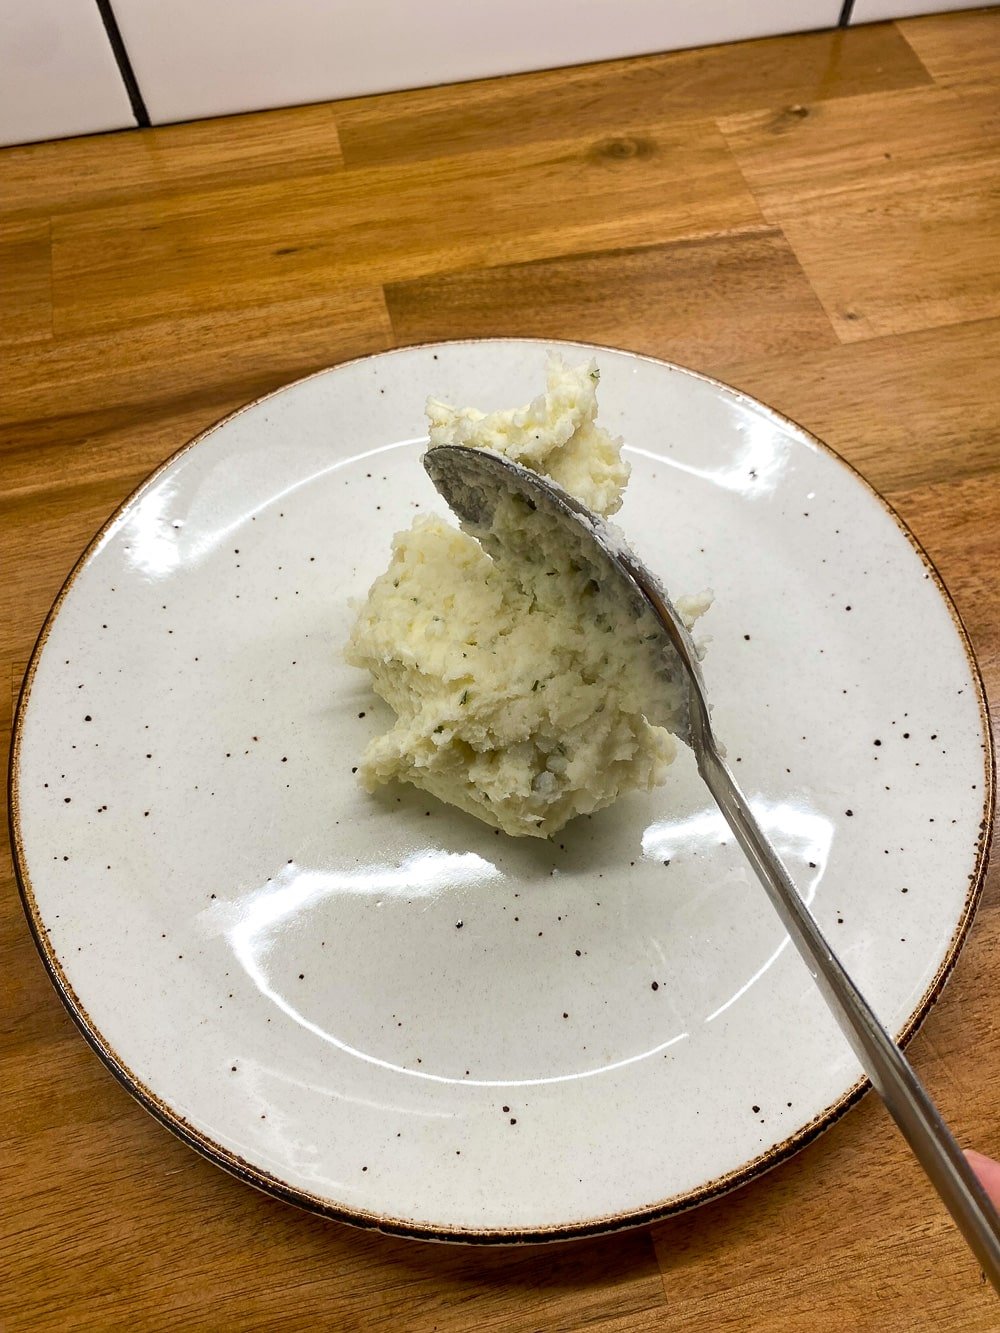 Adding the boursin mashed potatoes to the plate